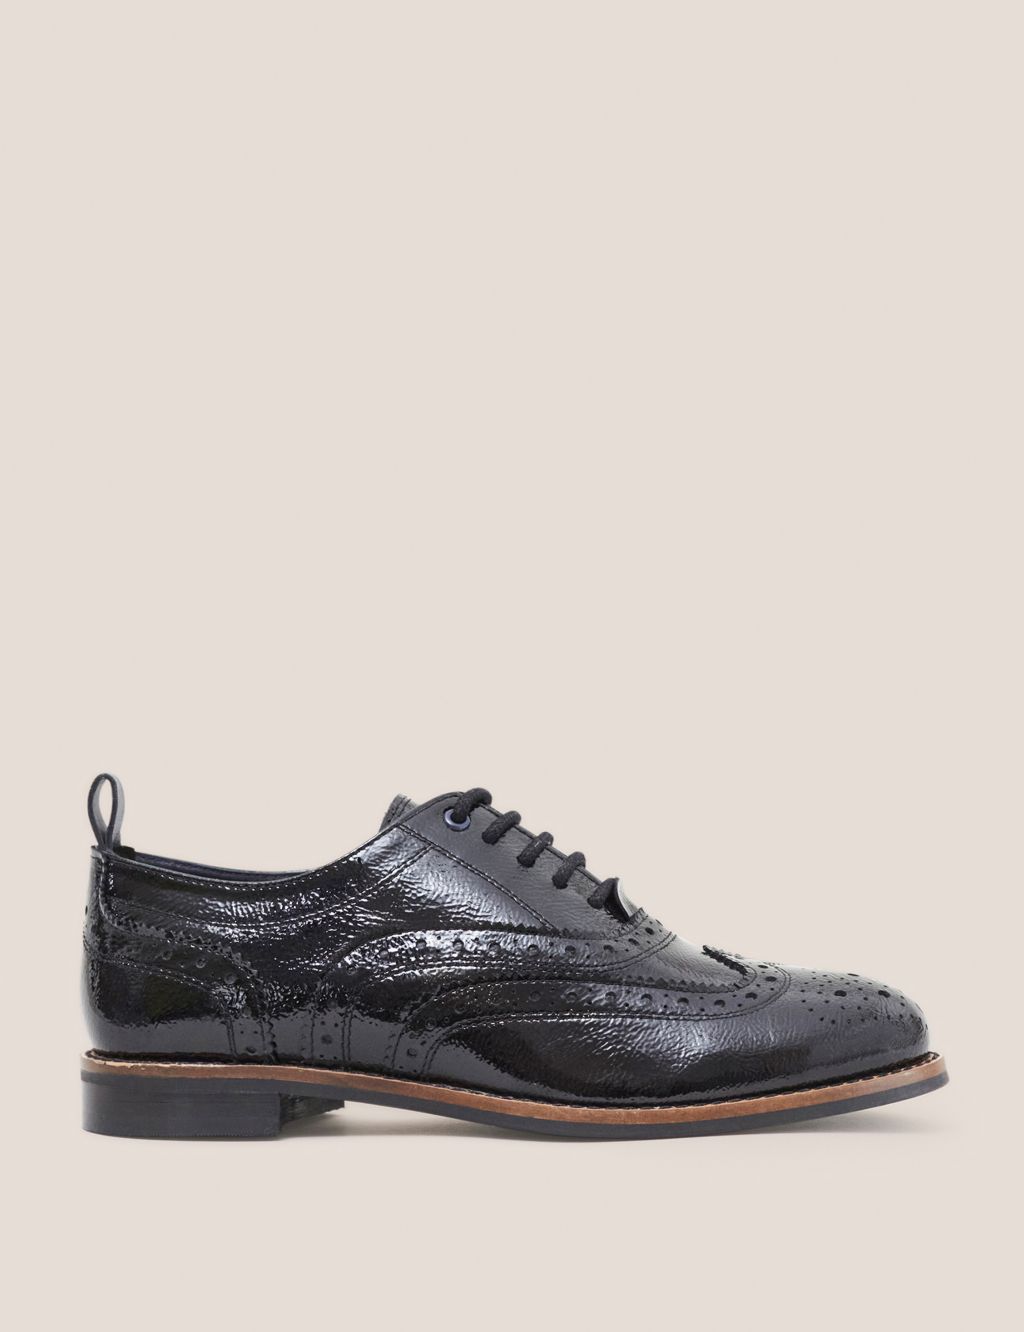 Leather Patent Lace Up Flat Brogues image 1